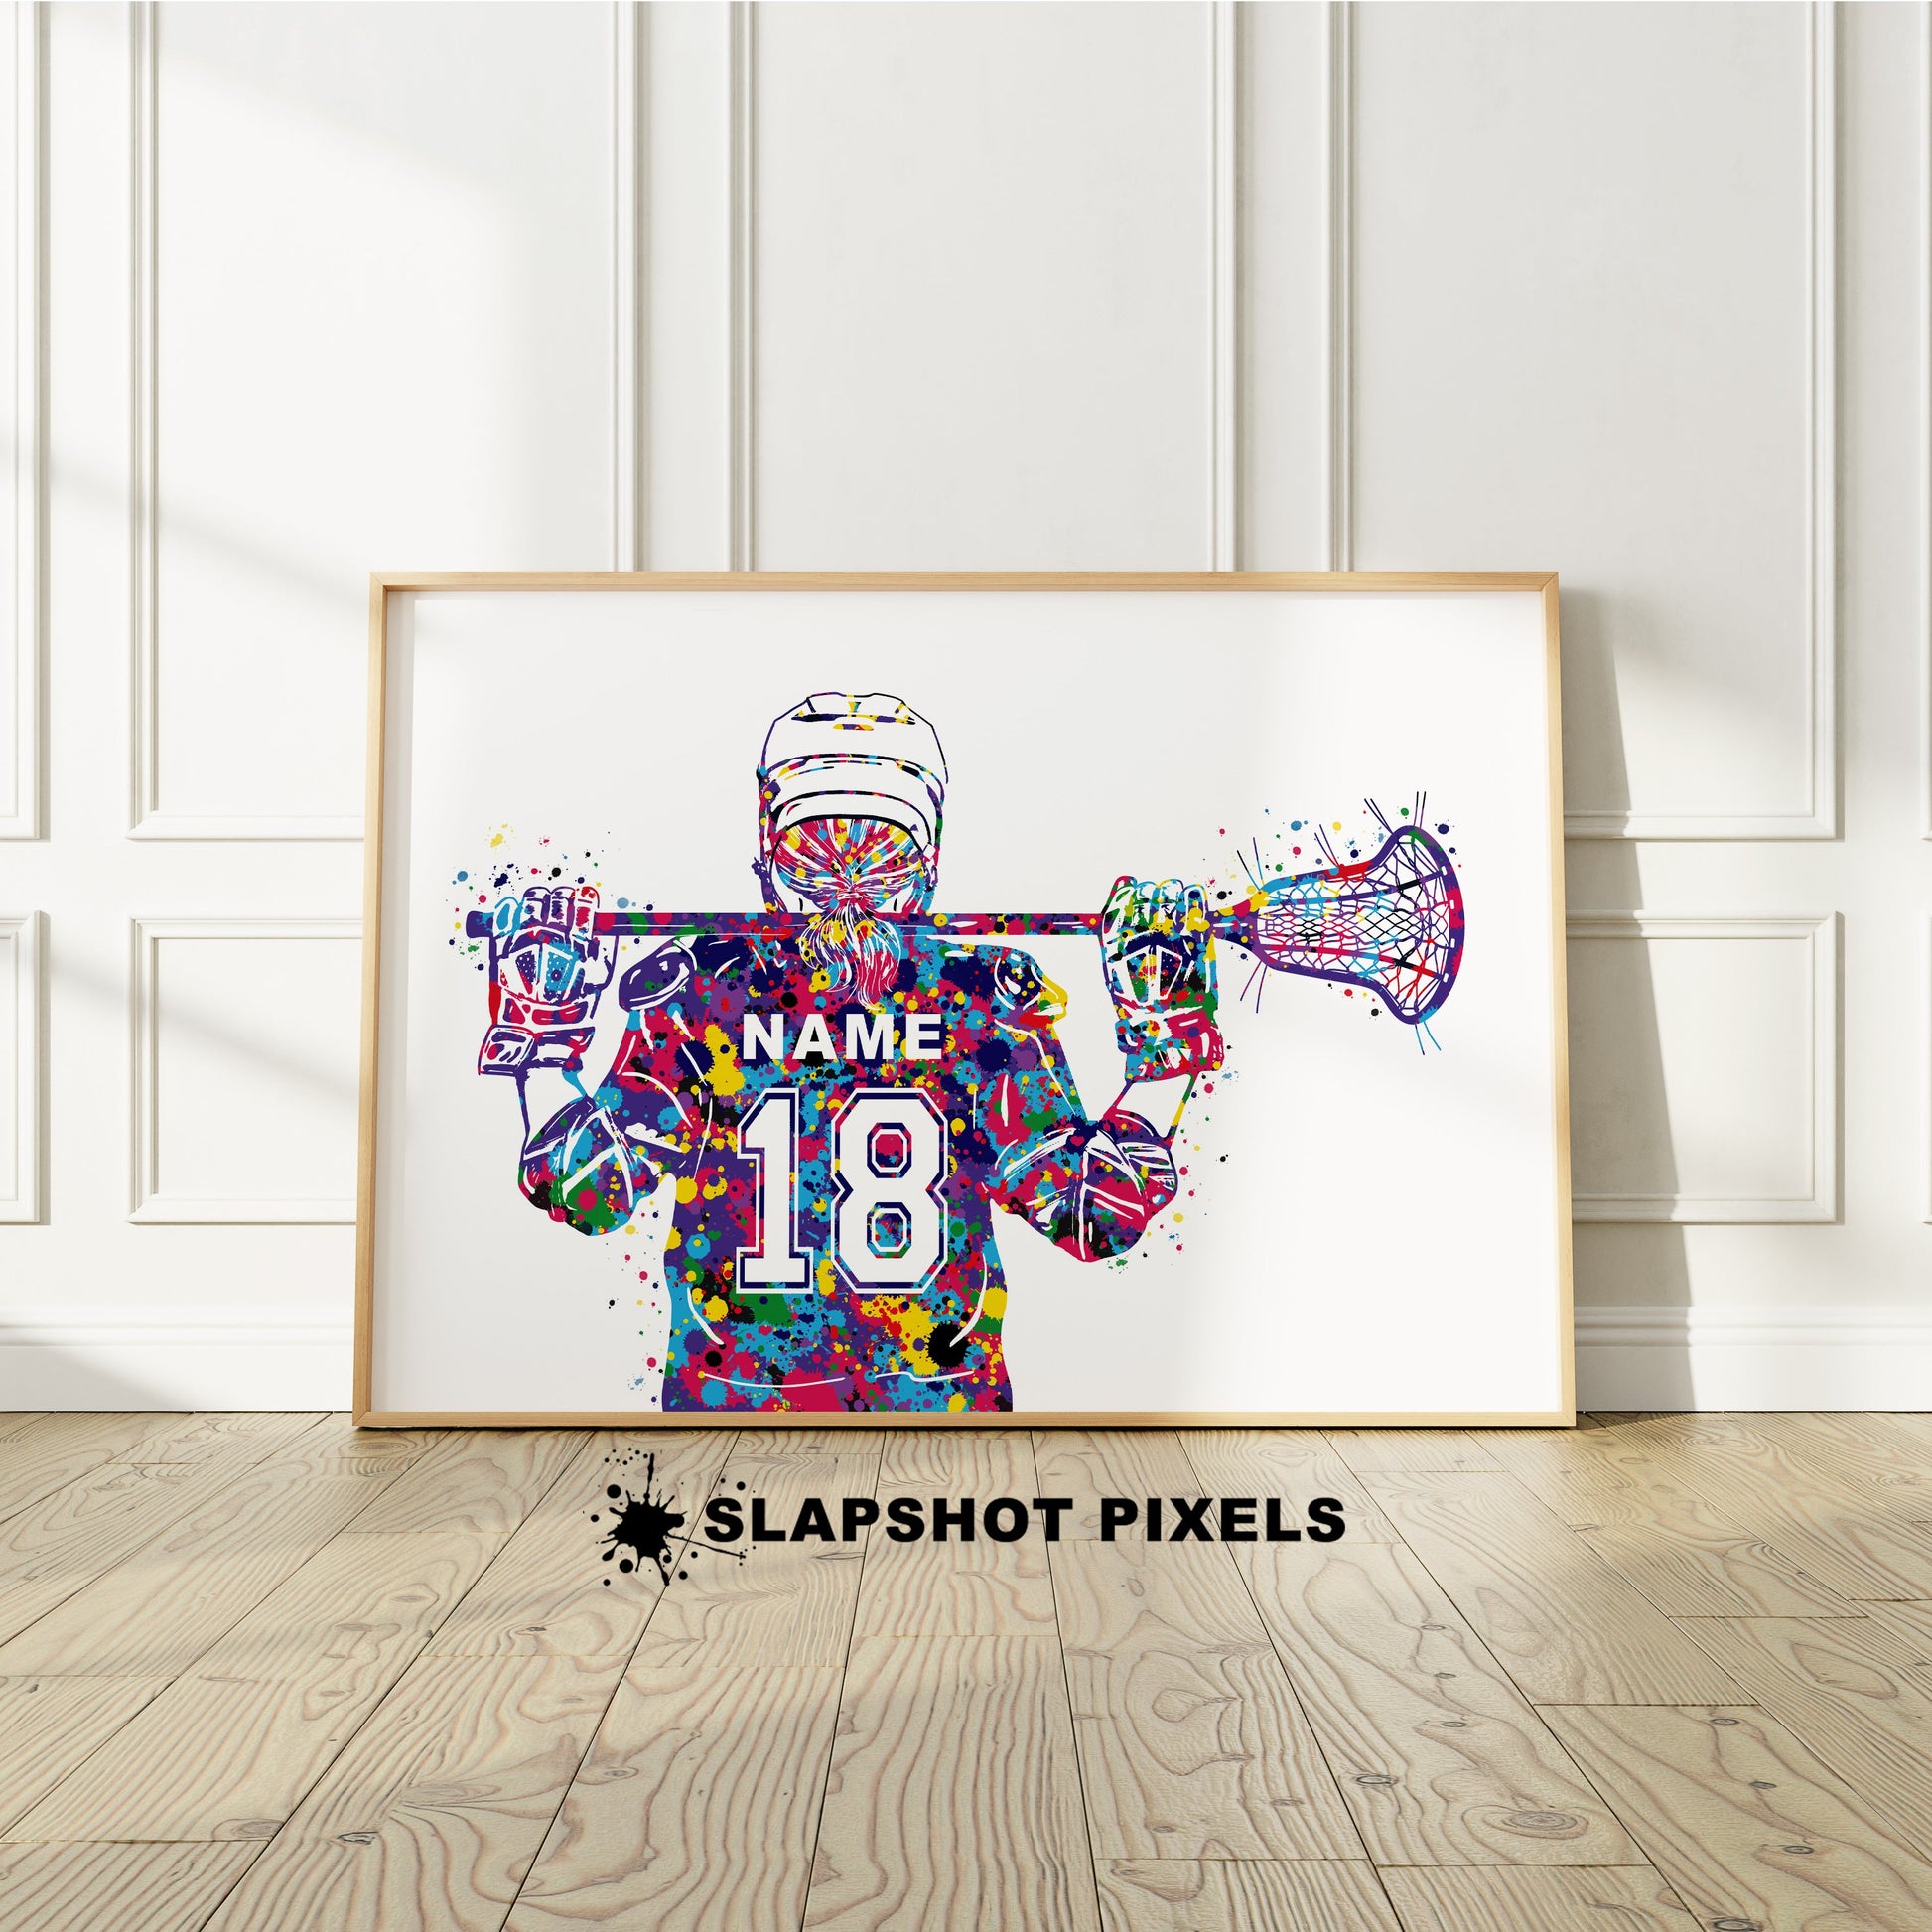 Personalized girl lacrosse poster showing back of a girl lacrosse player with custom name and number on the lacrosse jersey. Designed in watercolor splatters. Perfect lacrosse gifts for girls, lacrosse goalie prints, lacrosse team gifts, lacrosse coach gift, lacrosse wall art décor in a lacrosse bedroom and birthday gifts for lacrosse players.